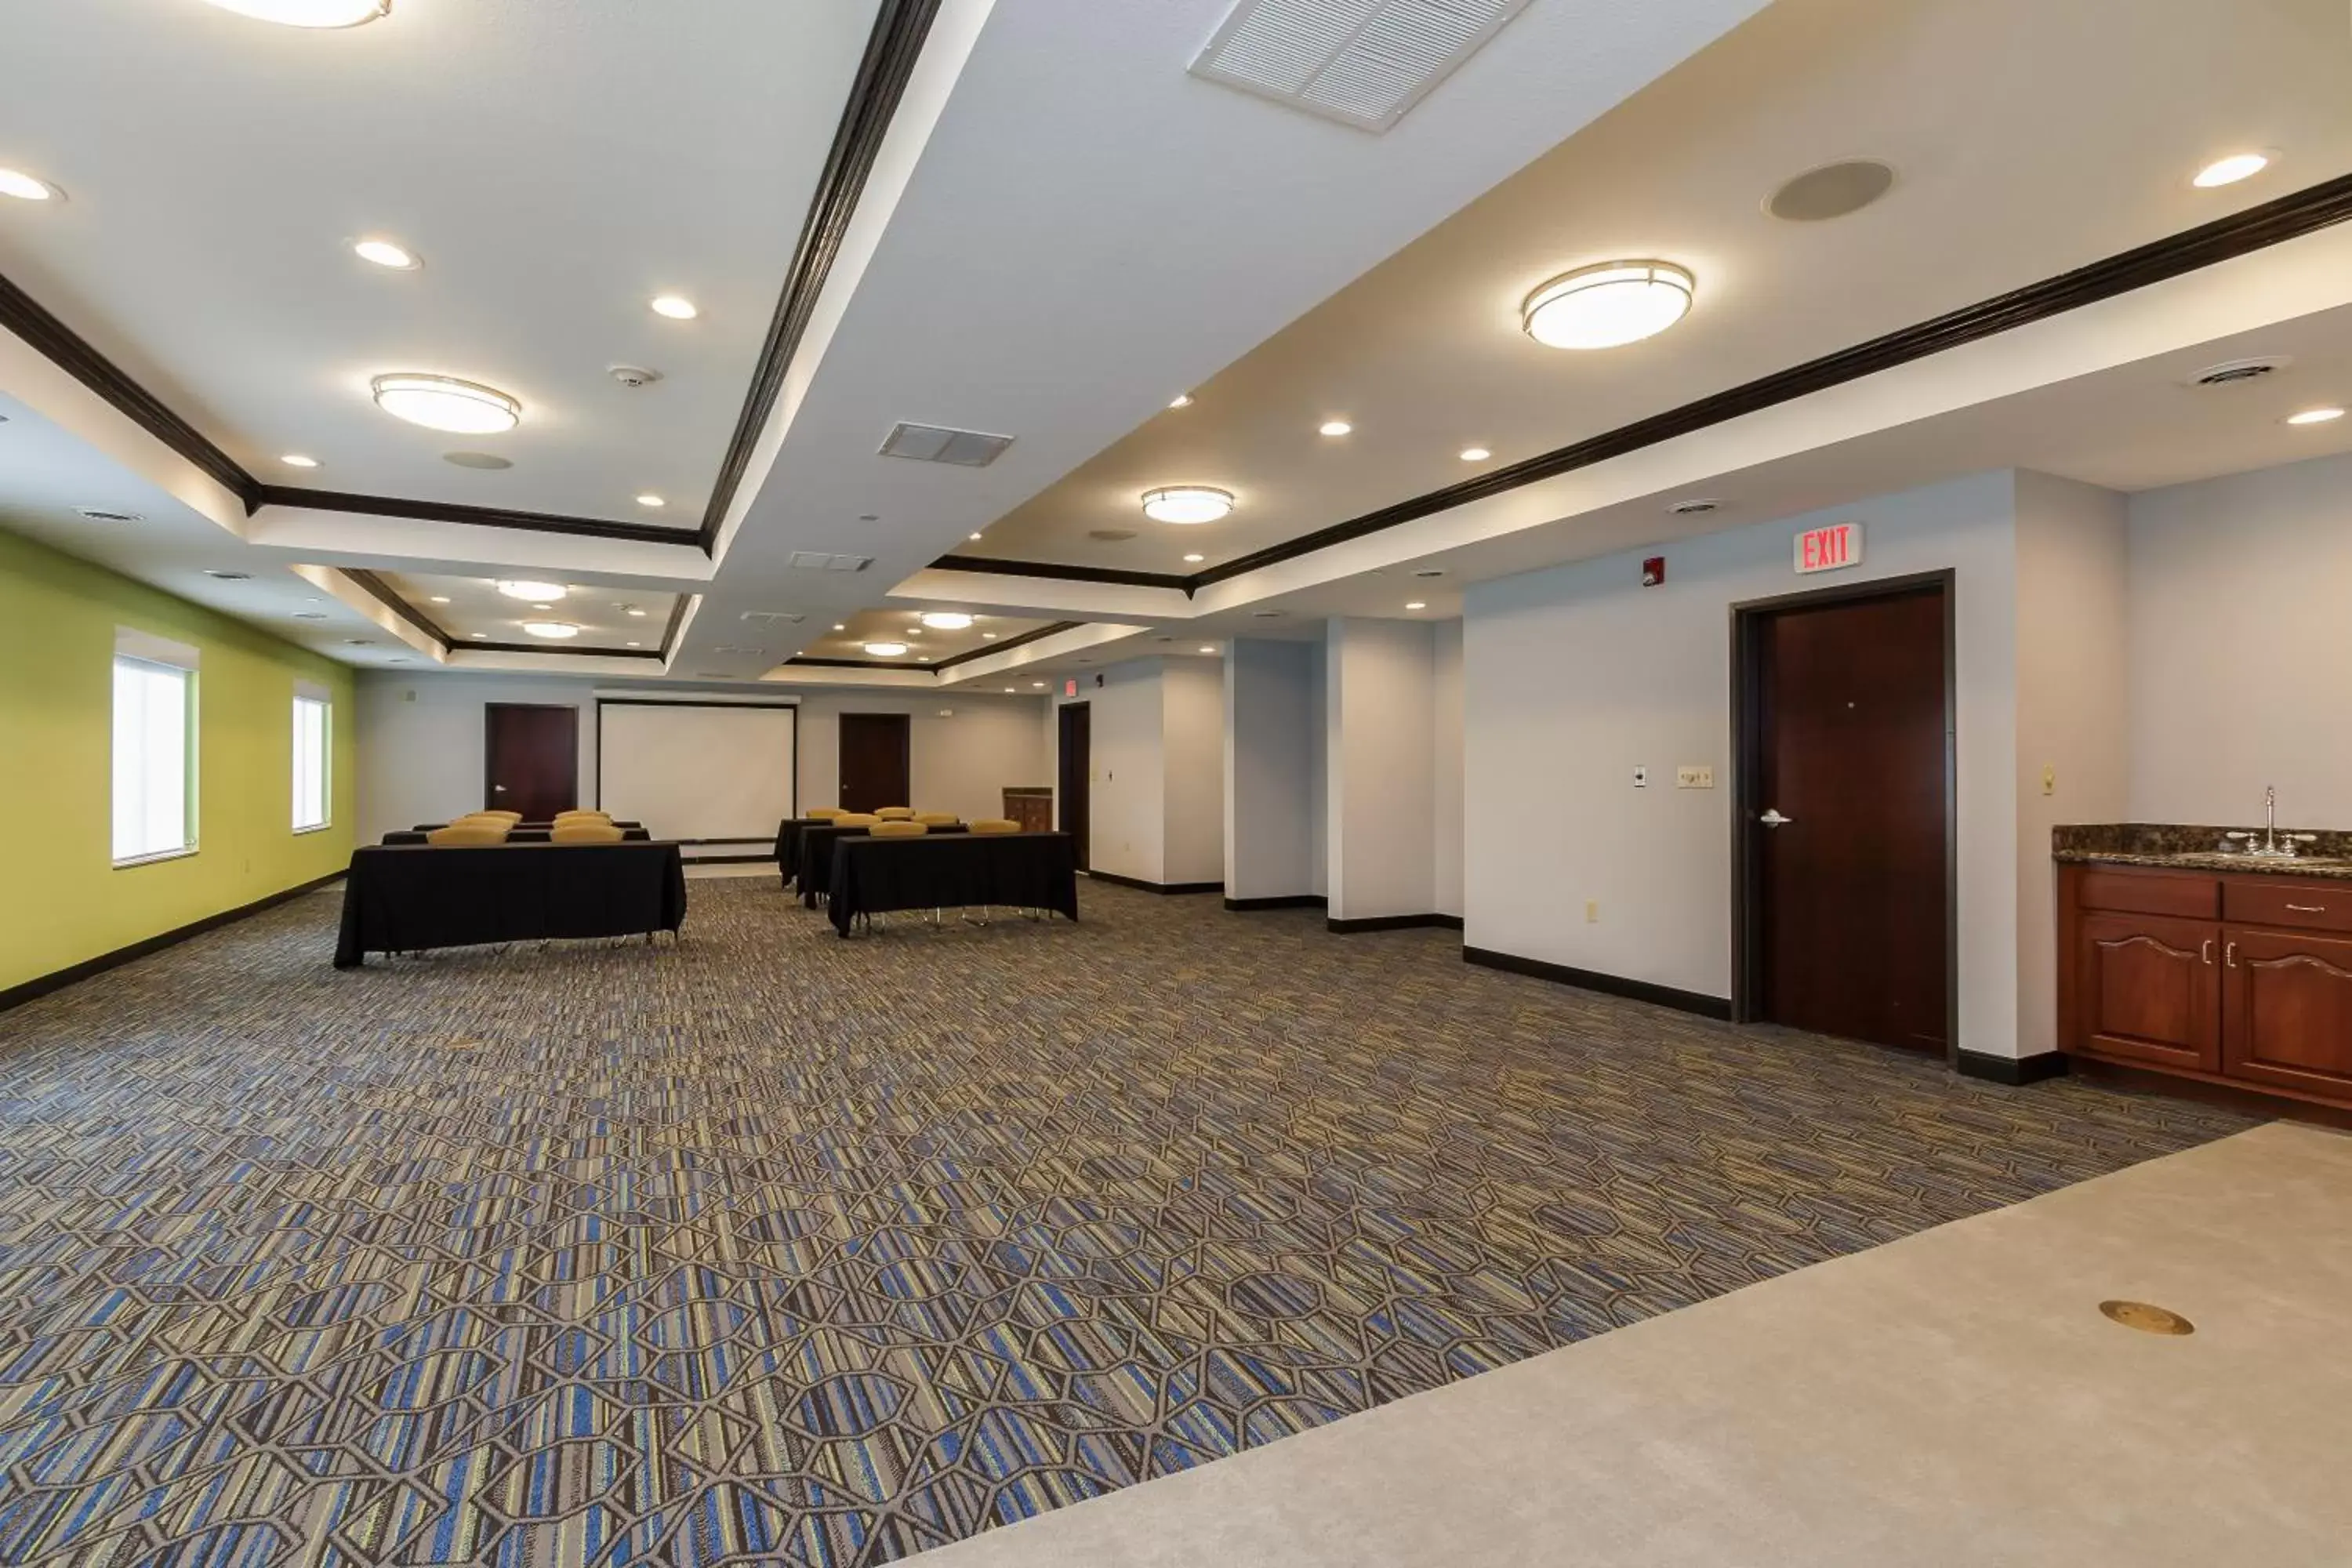 Meeting/conference room, Banquet Facilities in Holiday Inn Express & Suites - South Bend - Notre Dame Univ.